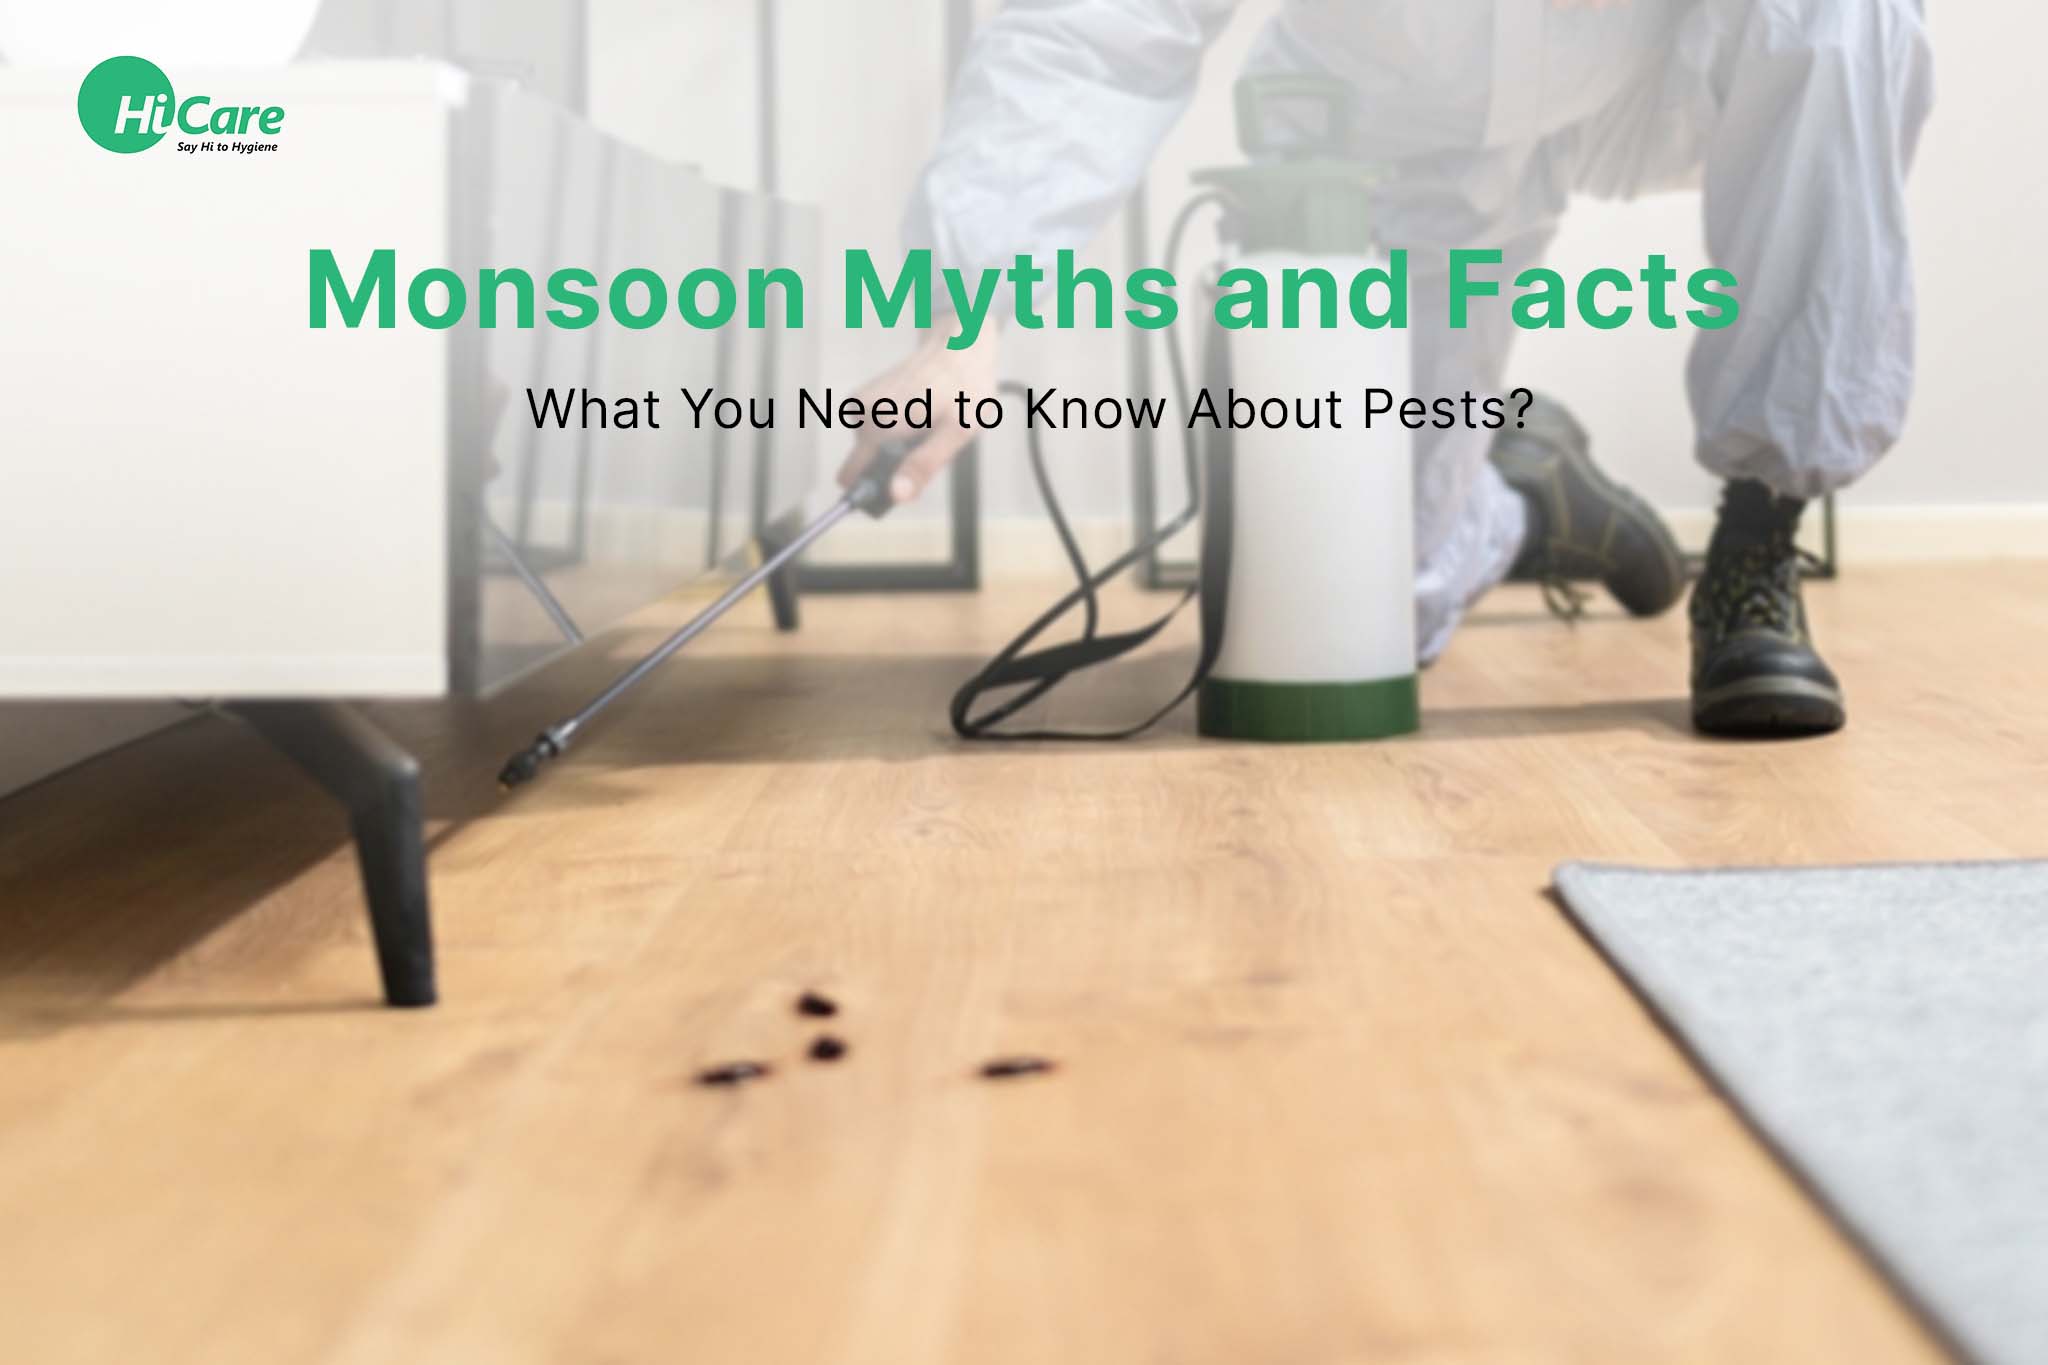 monsoon myths and facts: what you need to know about pests